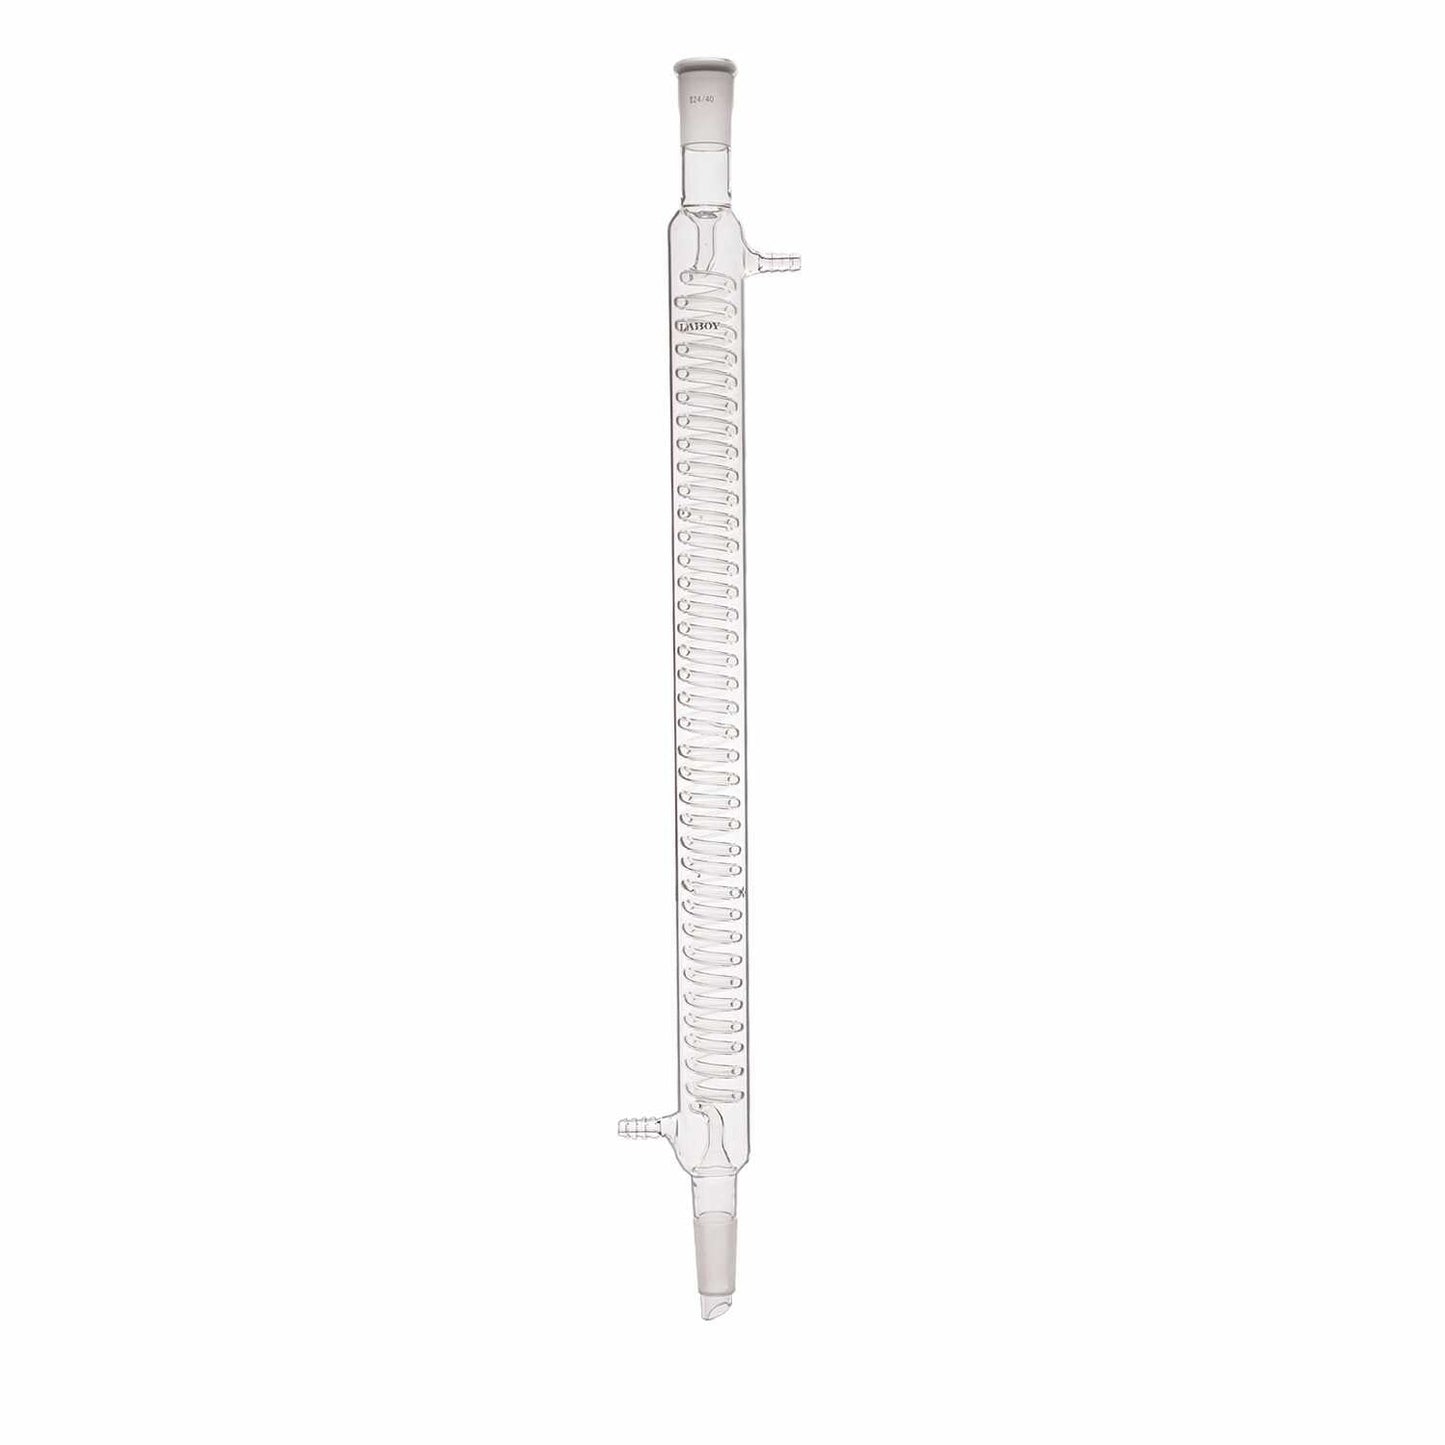 Glass Graham Condenser with Standard Taper Joint and Hose Connections - Scienmart